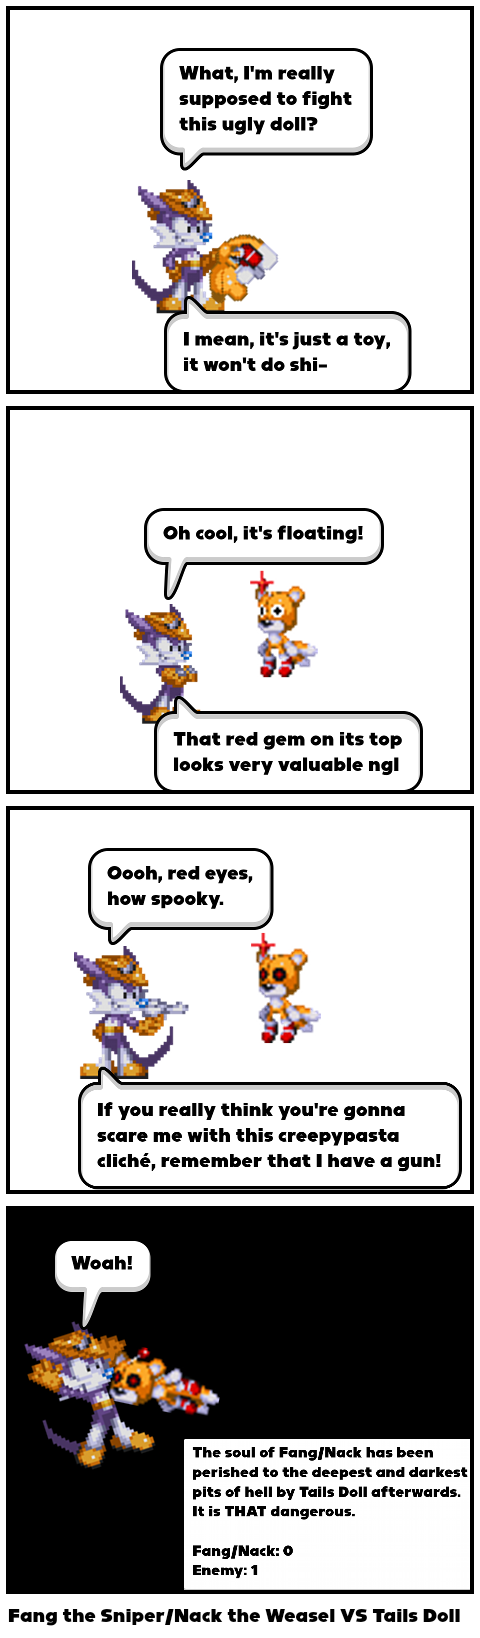 Fang the Sniper/Nack the Weasel VS Tails Doll